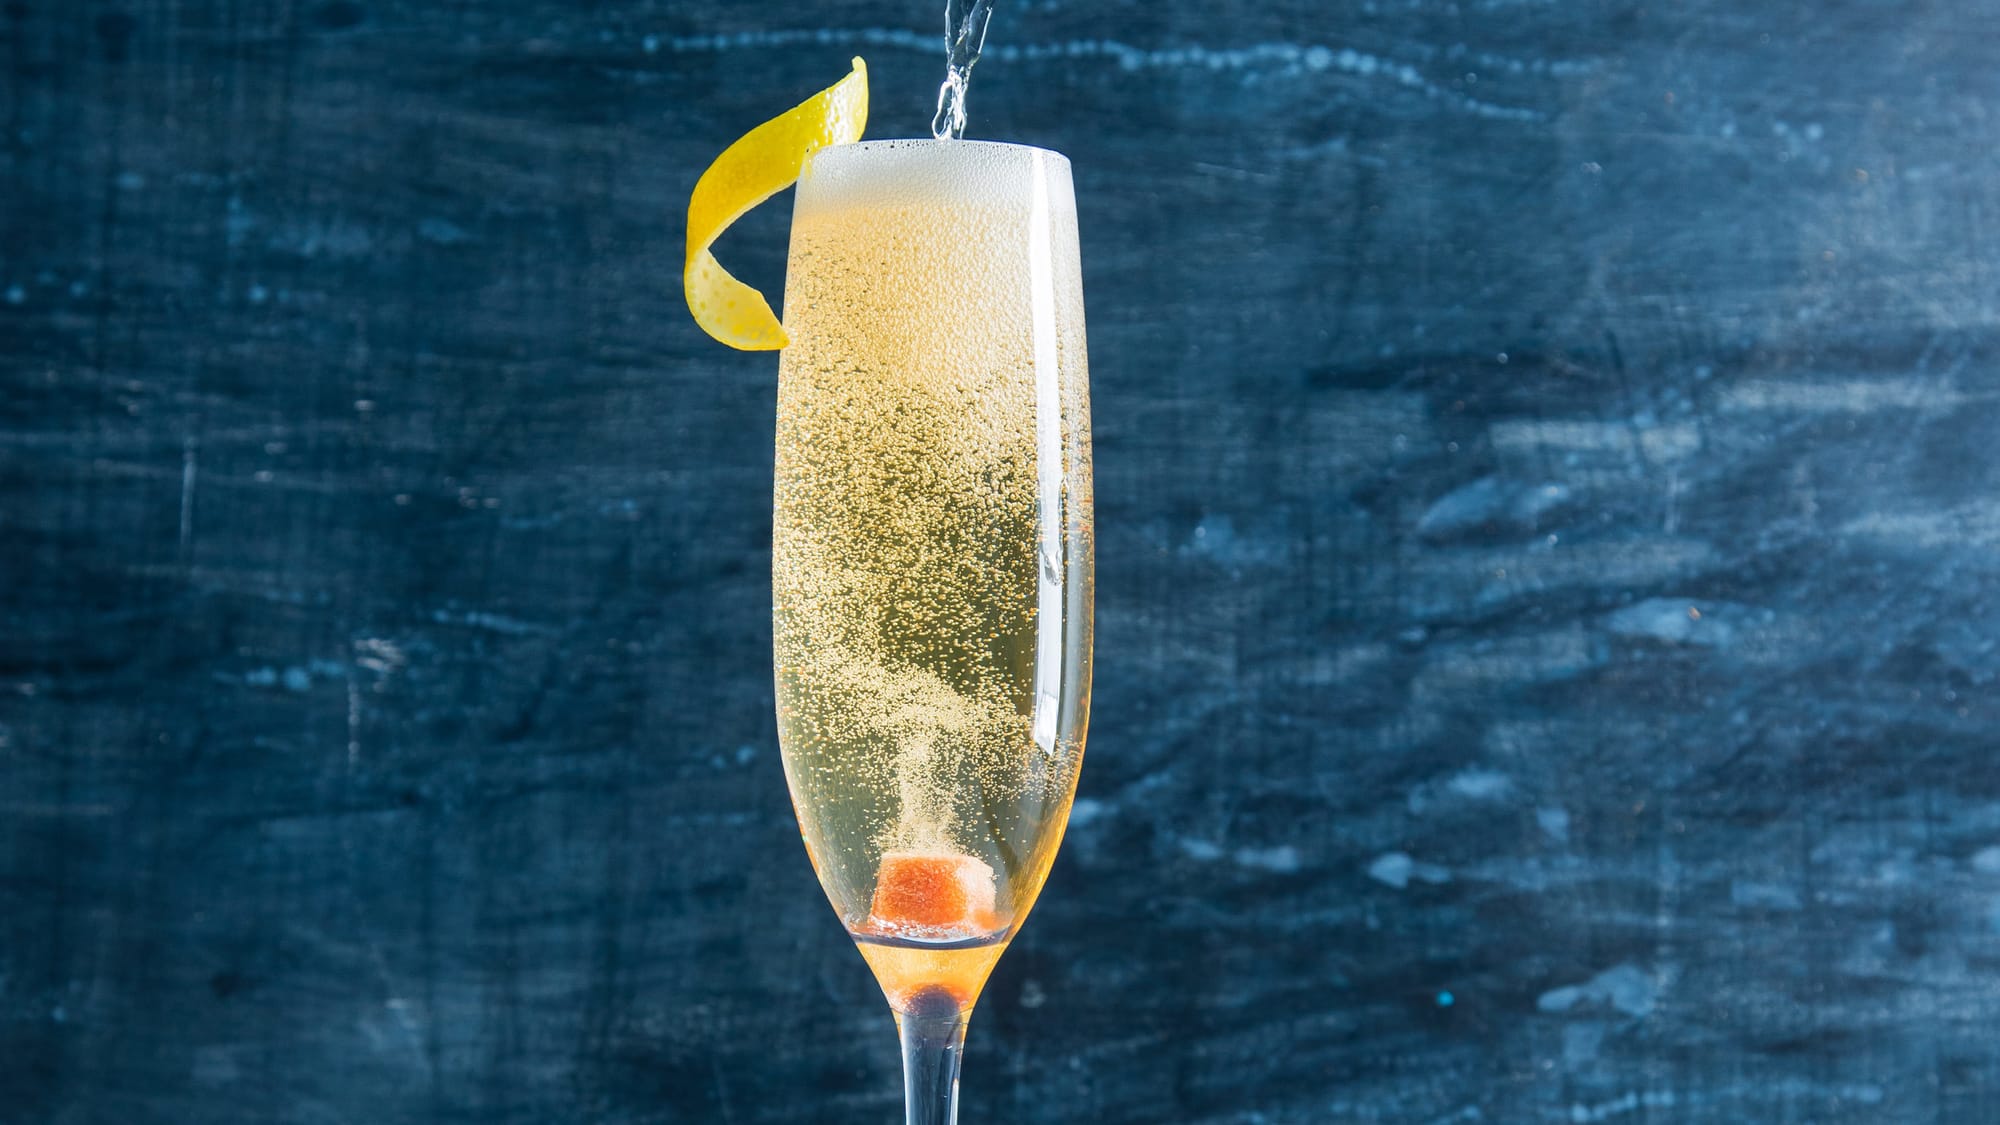 Whether you want to splurge or save, here's how to make a cocktail that sparkles